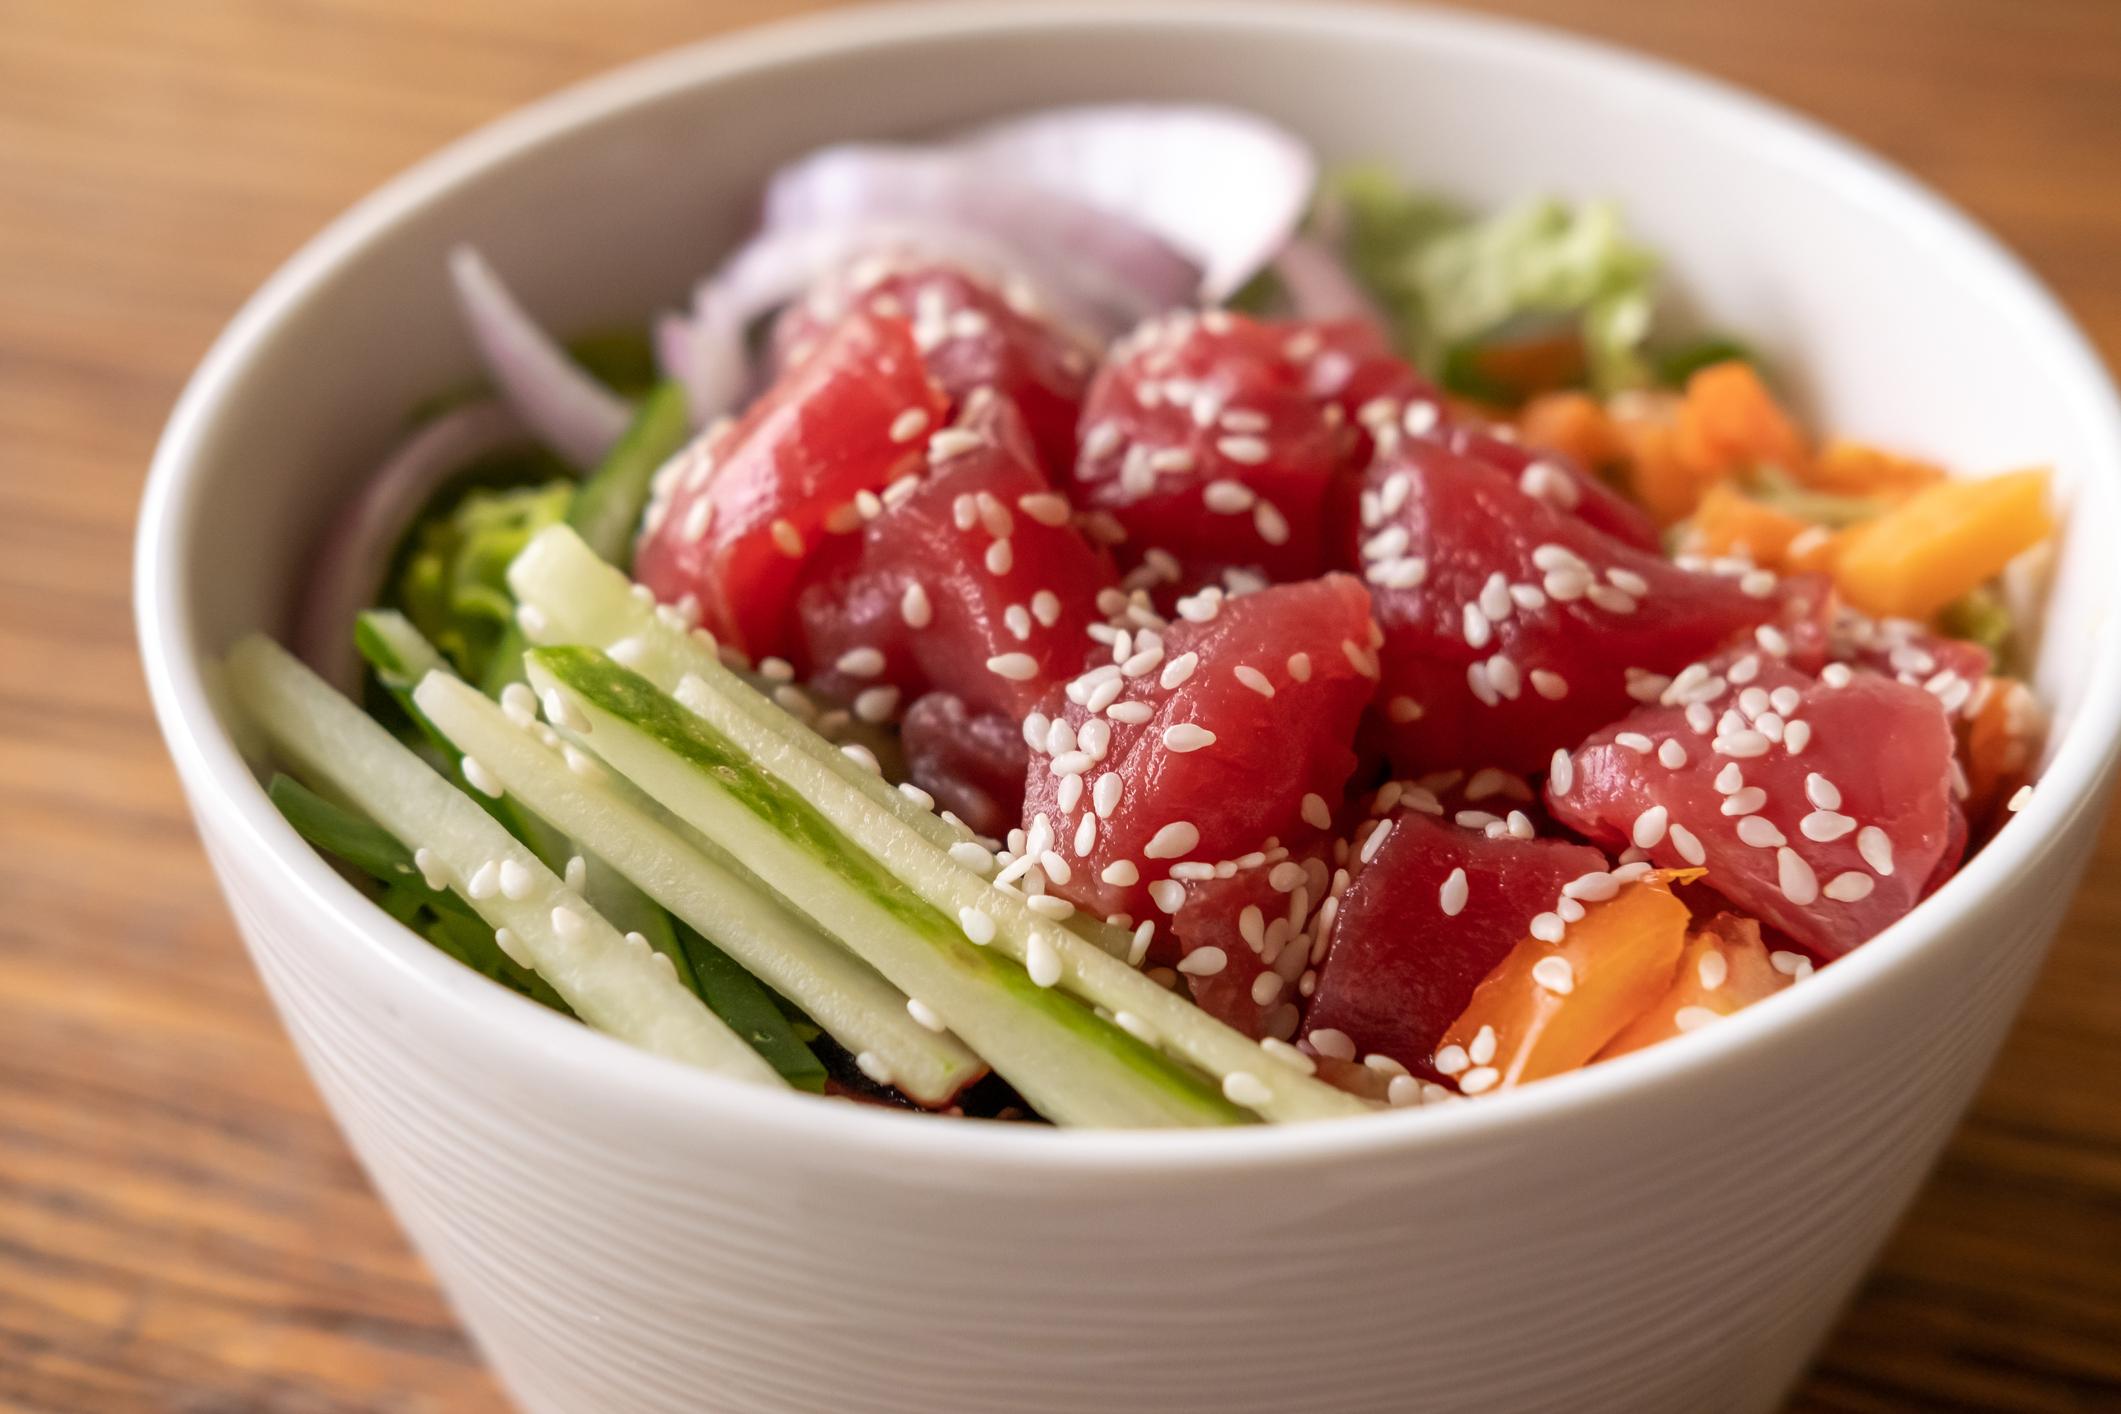 Discover Mouth-Watering Poke Bowls at PurePoke Frisco